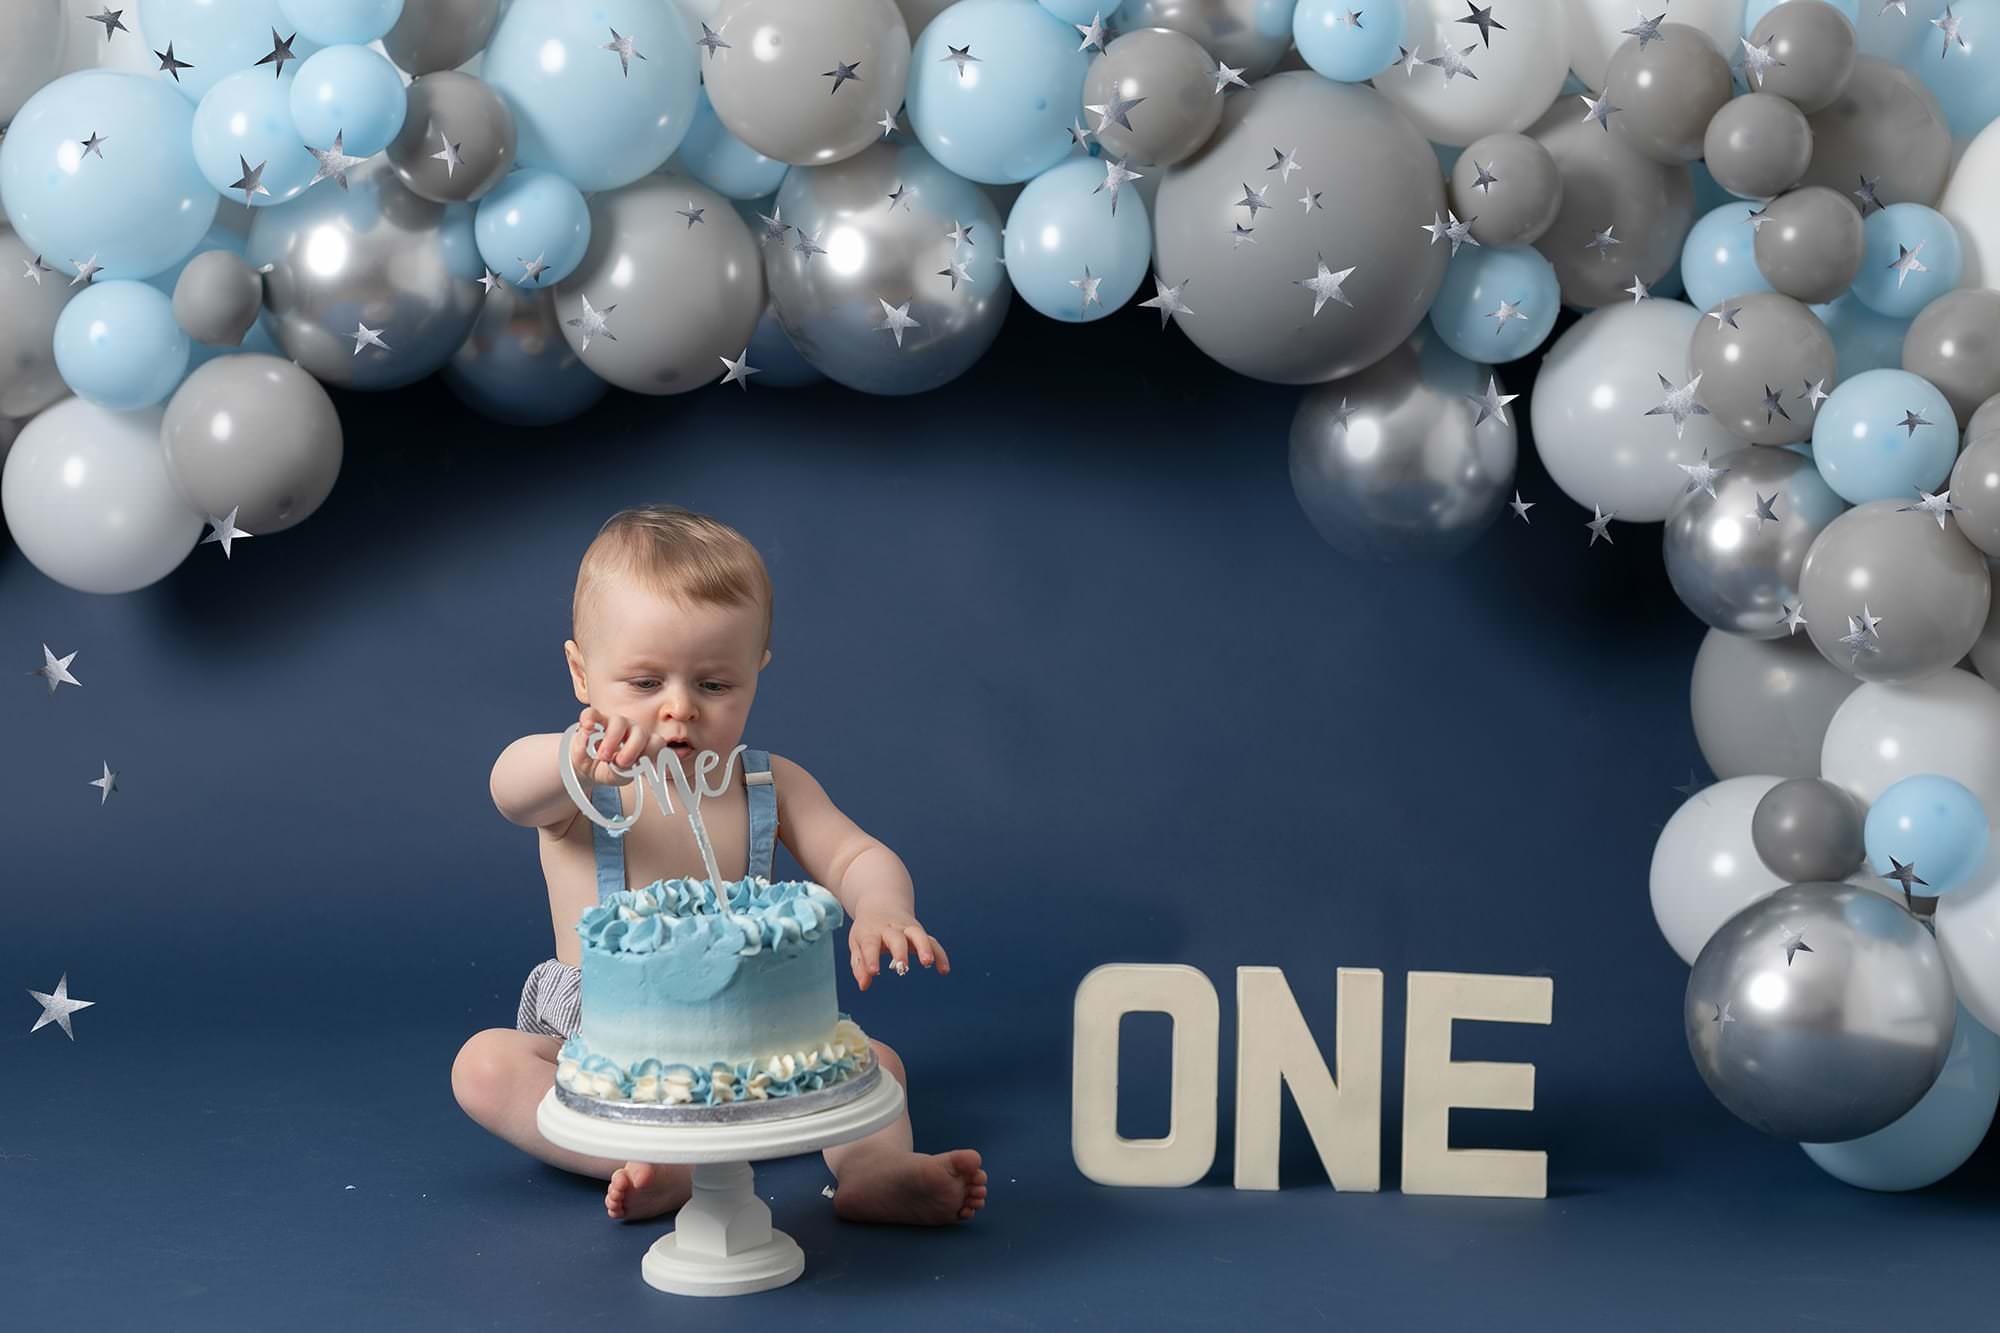 Baby boy on blue backdrop at his Birthday cakesmash photoshoot. Baby is sat behind a cake on a cake stand with a blue, grey & white balloon garland behind him and ONE letters in cream